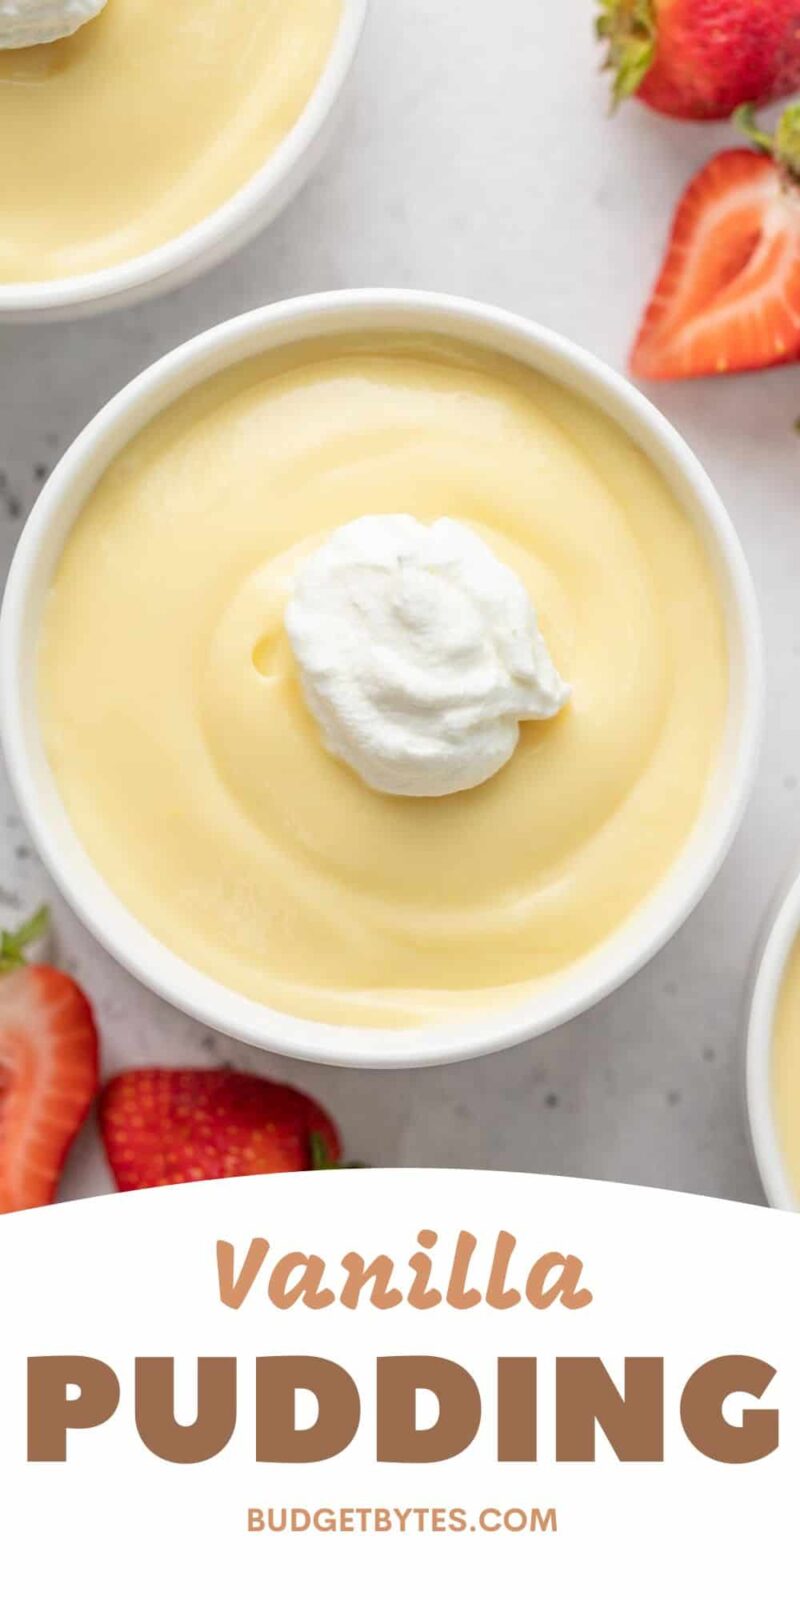 Overhead shot of vanilla pudding in a white bowl with a dollop of whipped cream and sliced strawberries next to it.